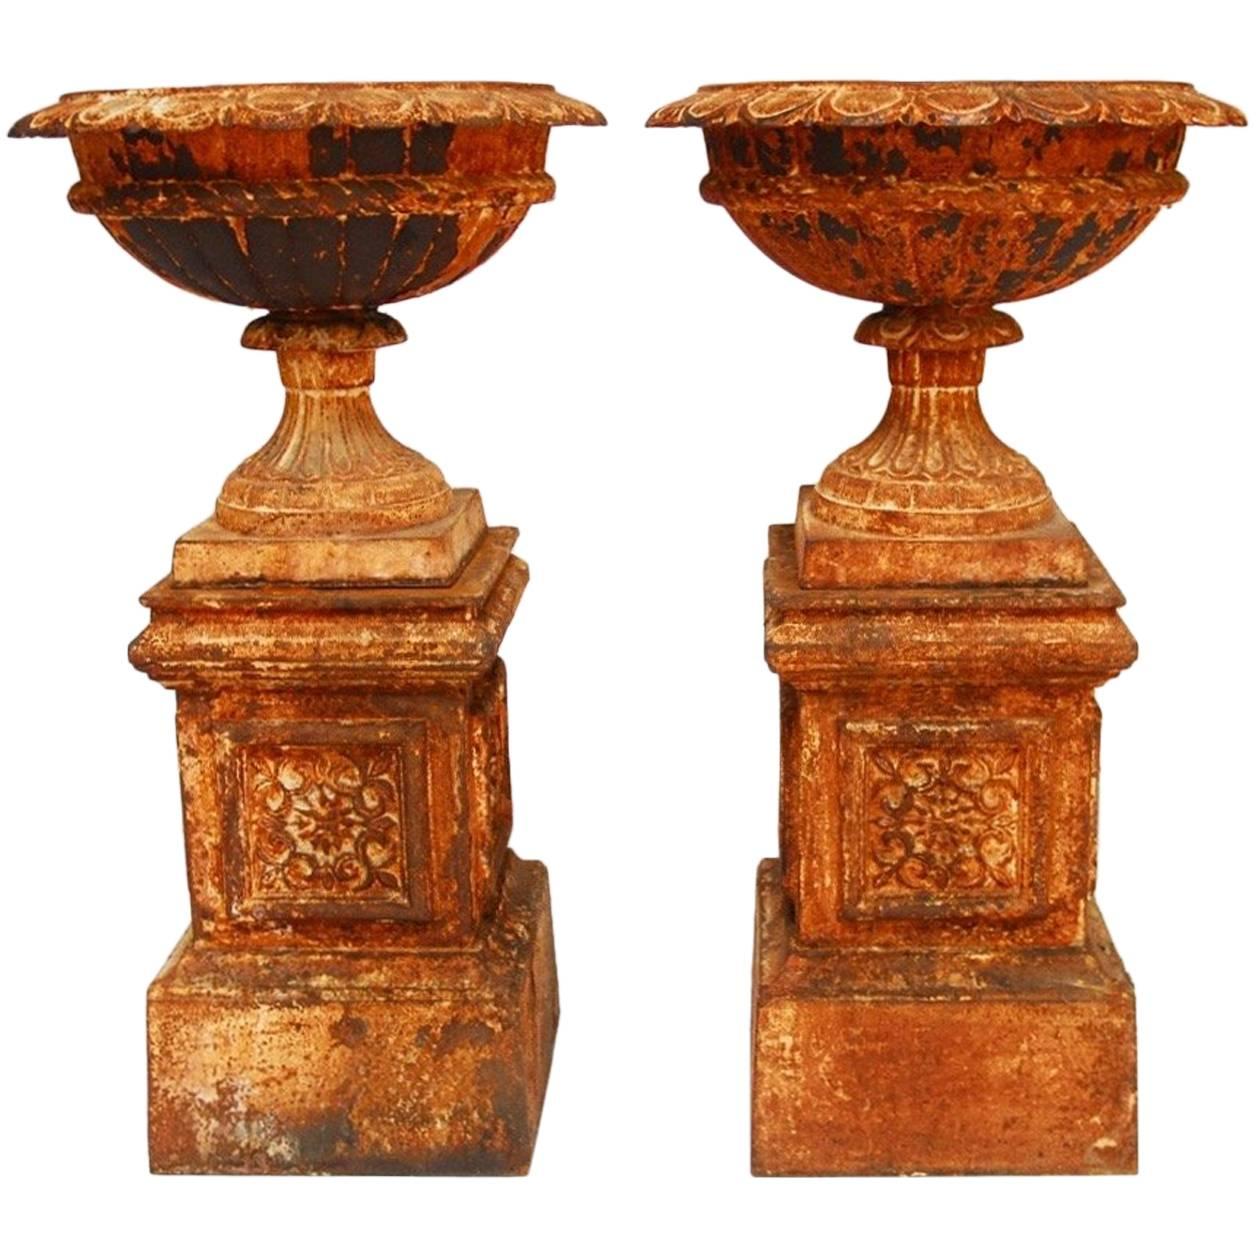 Pair of French Cast Iron Garden Urns on Plinths